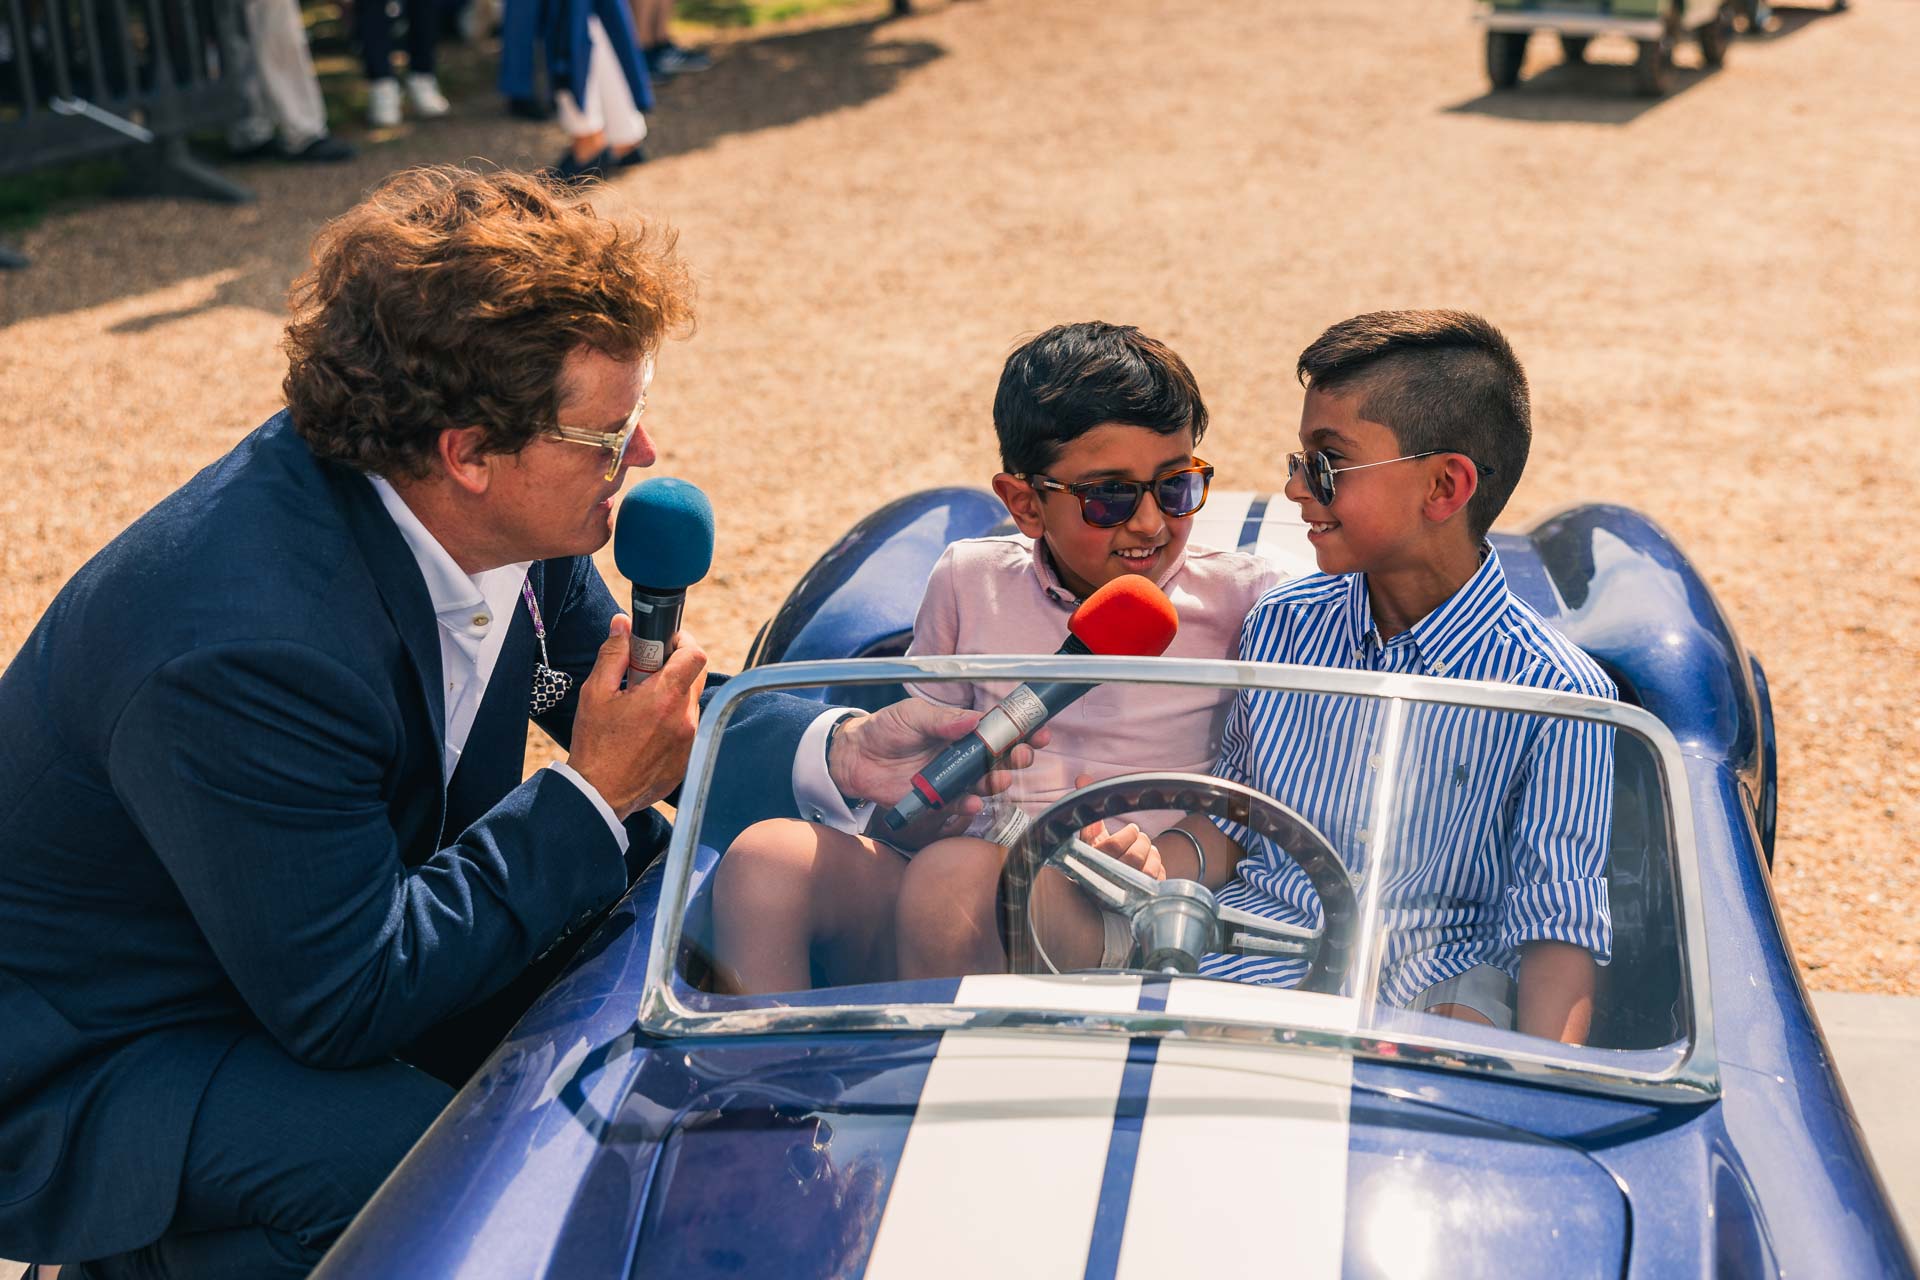 Junior Concours at Concours of Elegance